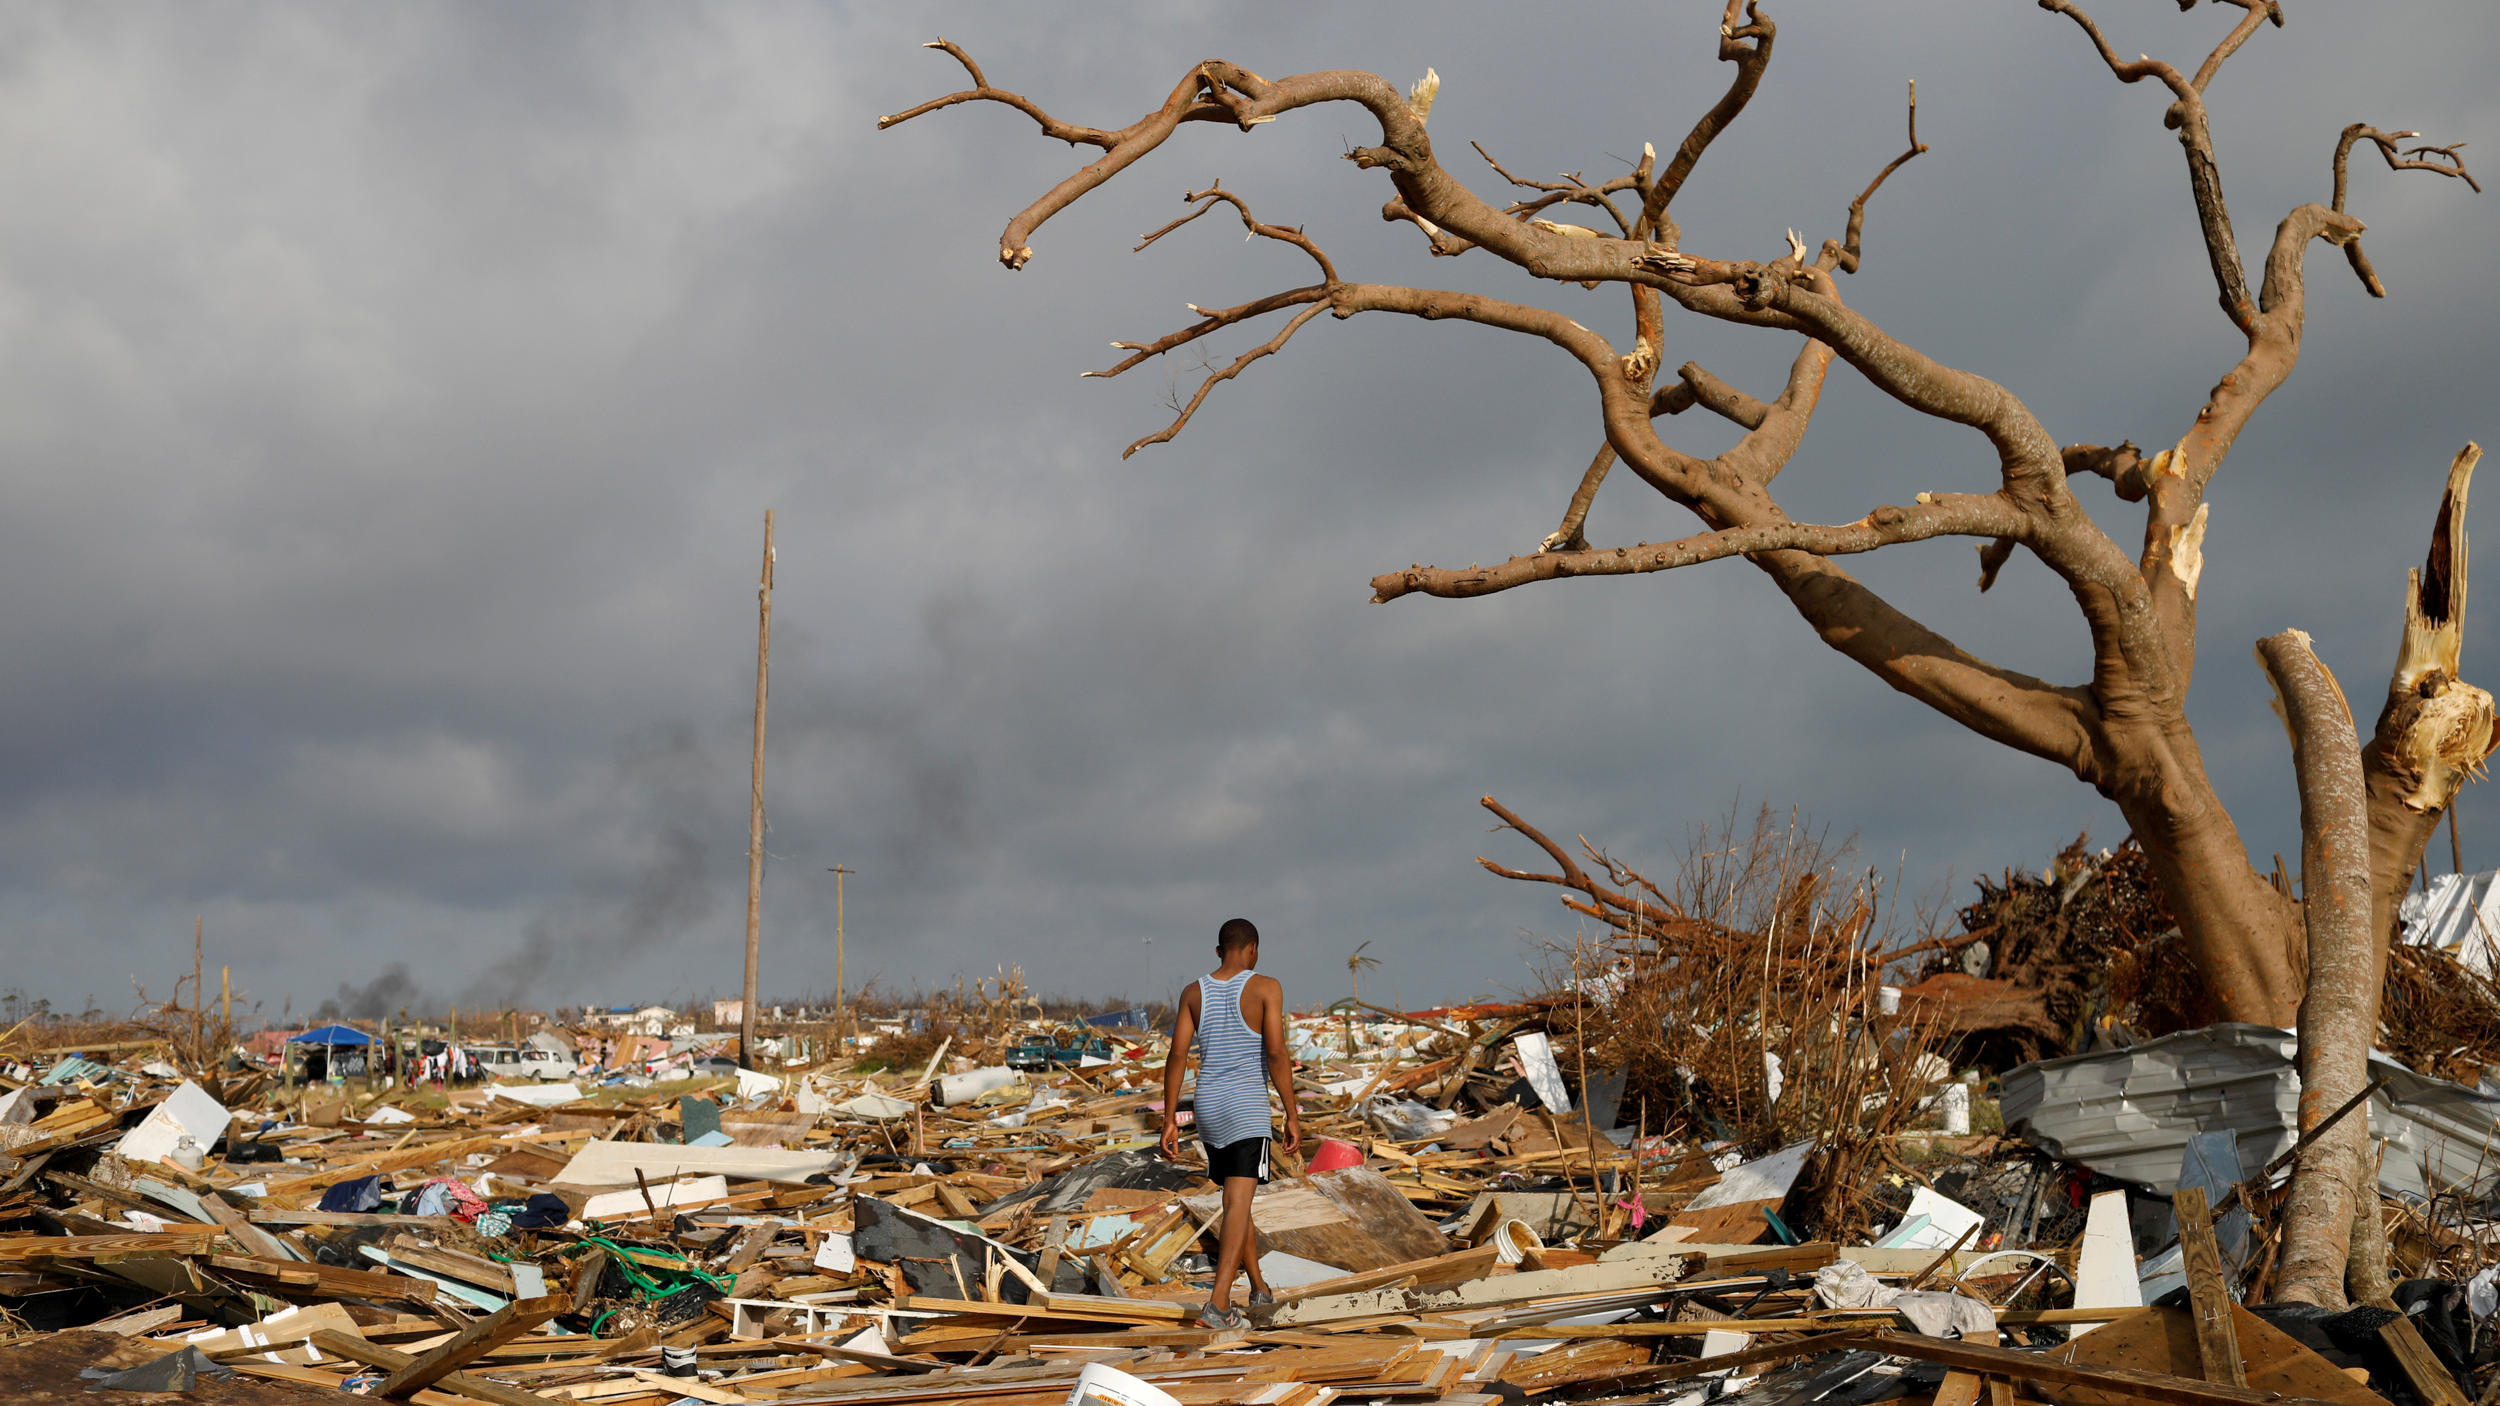 FILE PHOTO: A man walks among debris at the Mudd neighborhood, devastated after Hurricane Dorian hit the Abaco Islands in Marsh Harbour, Bahamas, September 6, 2019. REUTERS/Marco Bello/File Photo